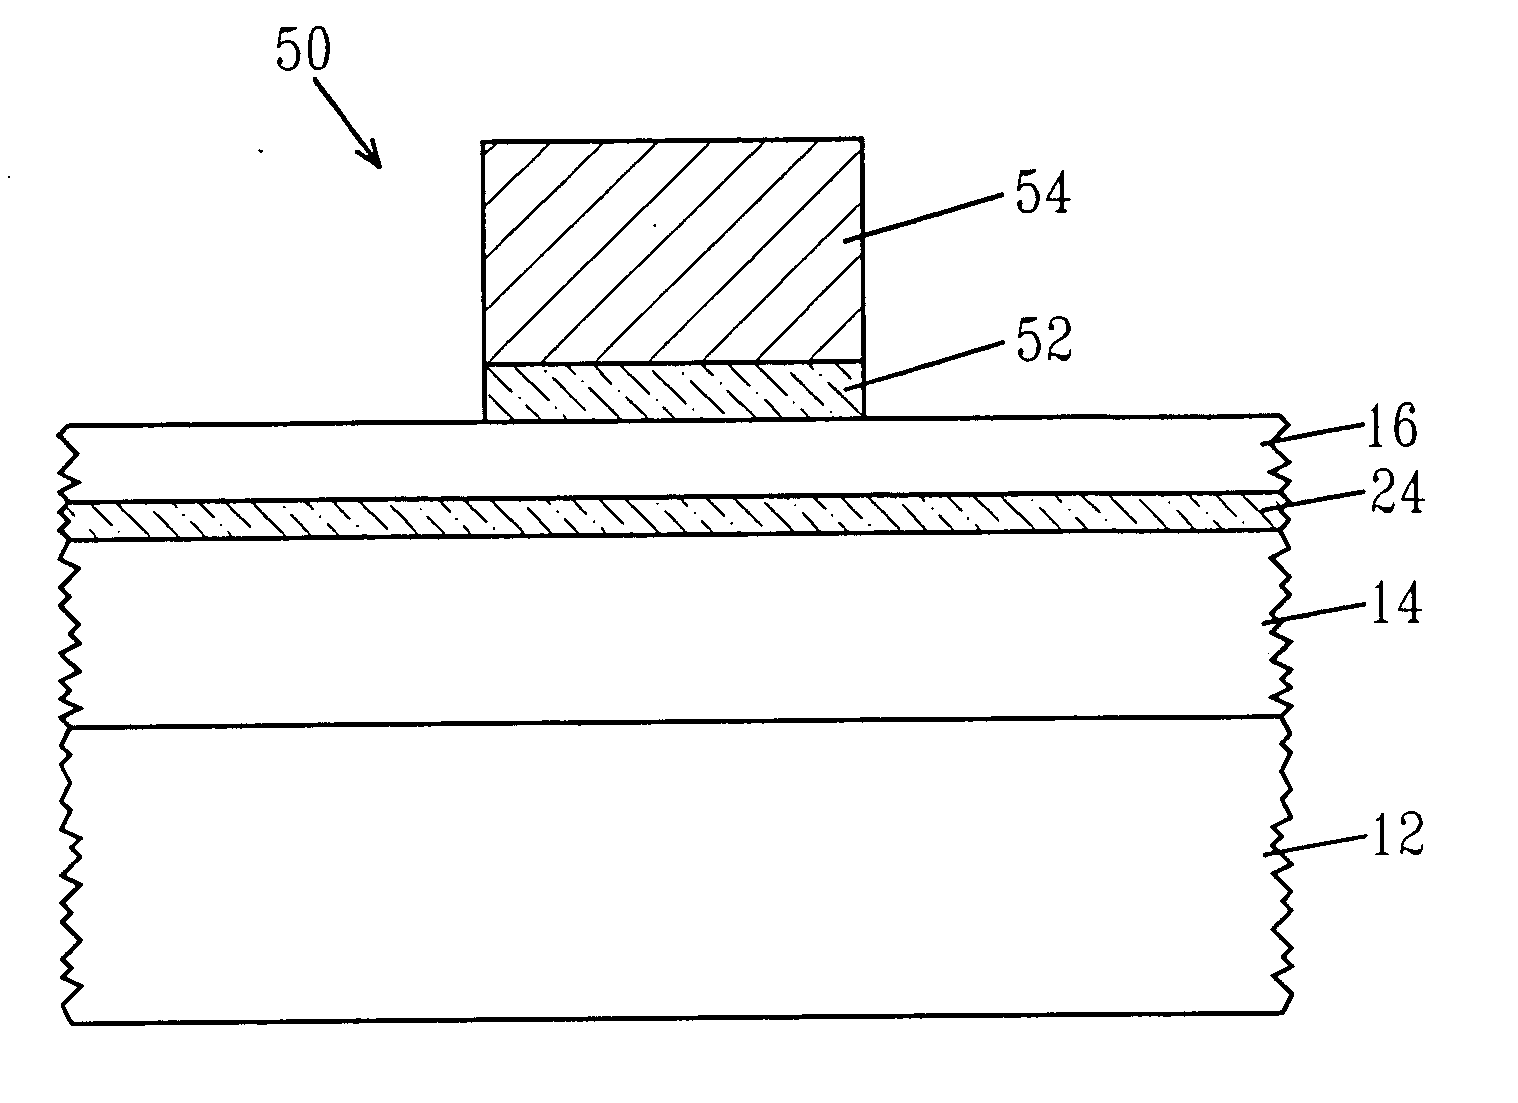 Strained semiconductor-on-insulator (sSOI) by a simox method